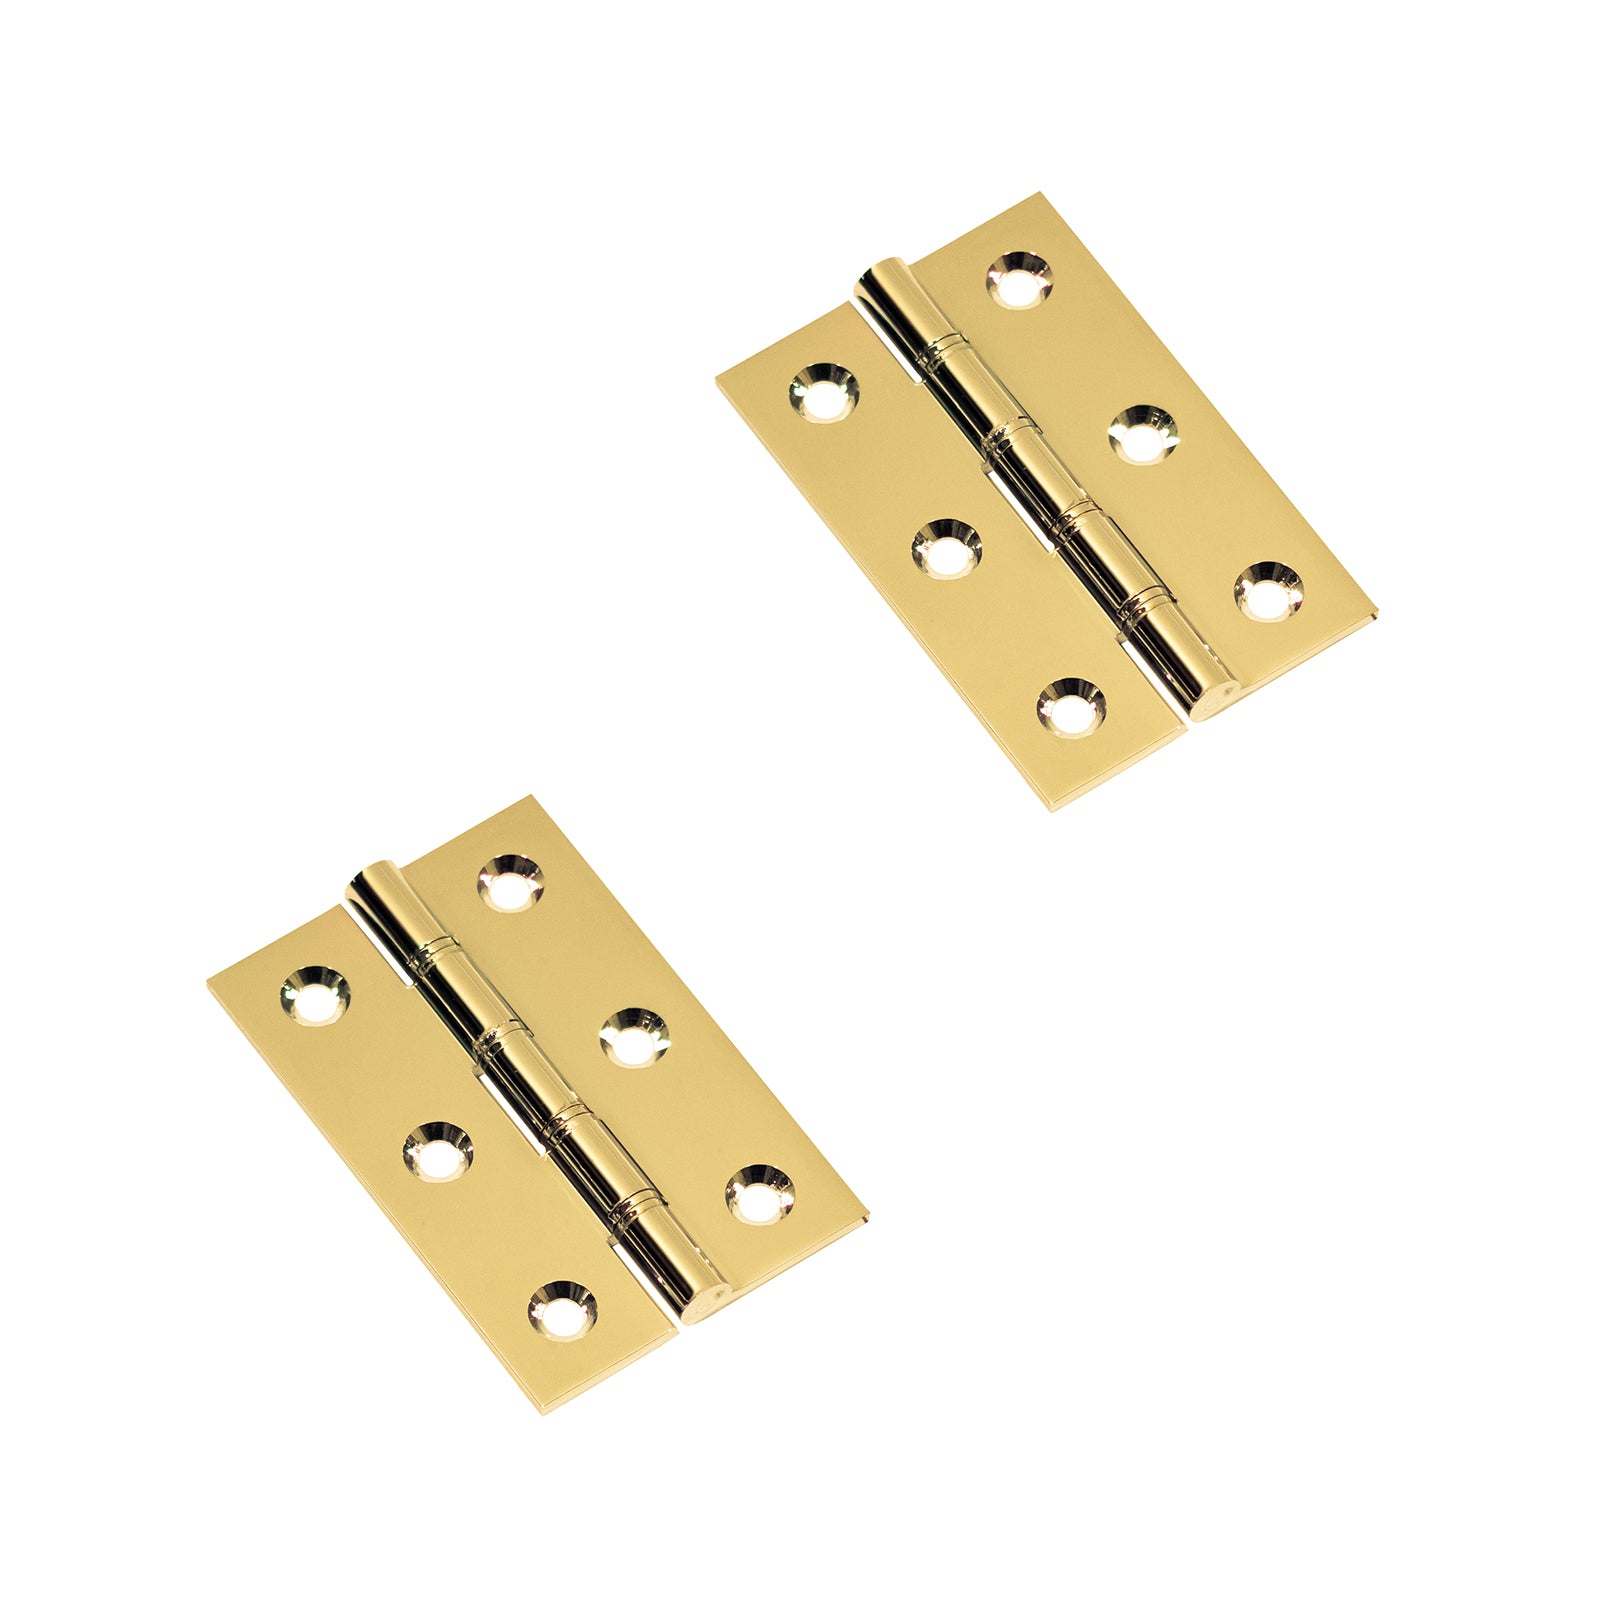 Solid Brass 3 Inch Butt Hinge in Polished Brass Finish